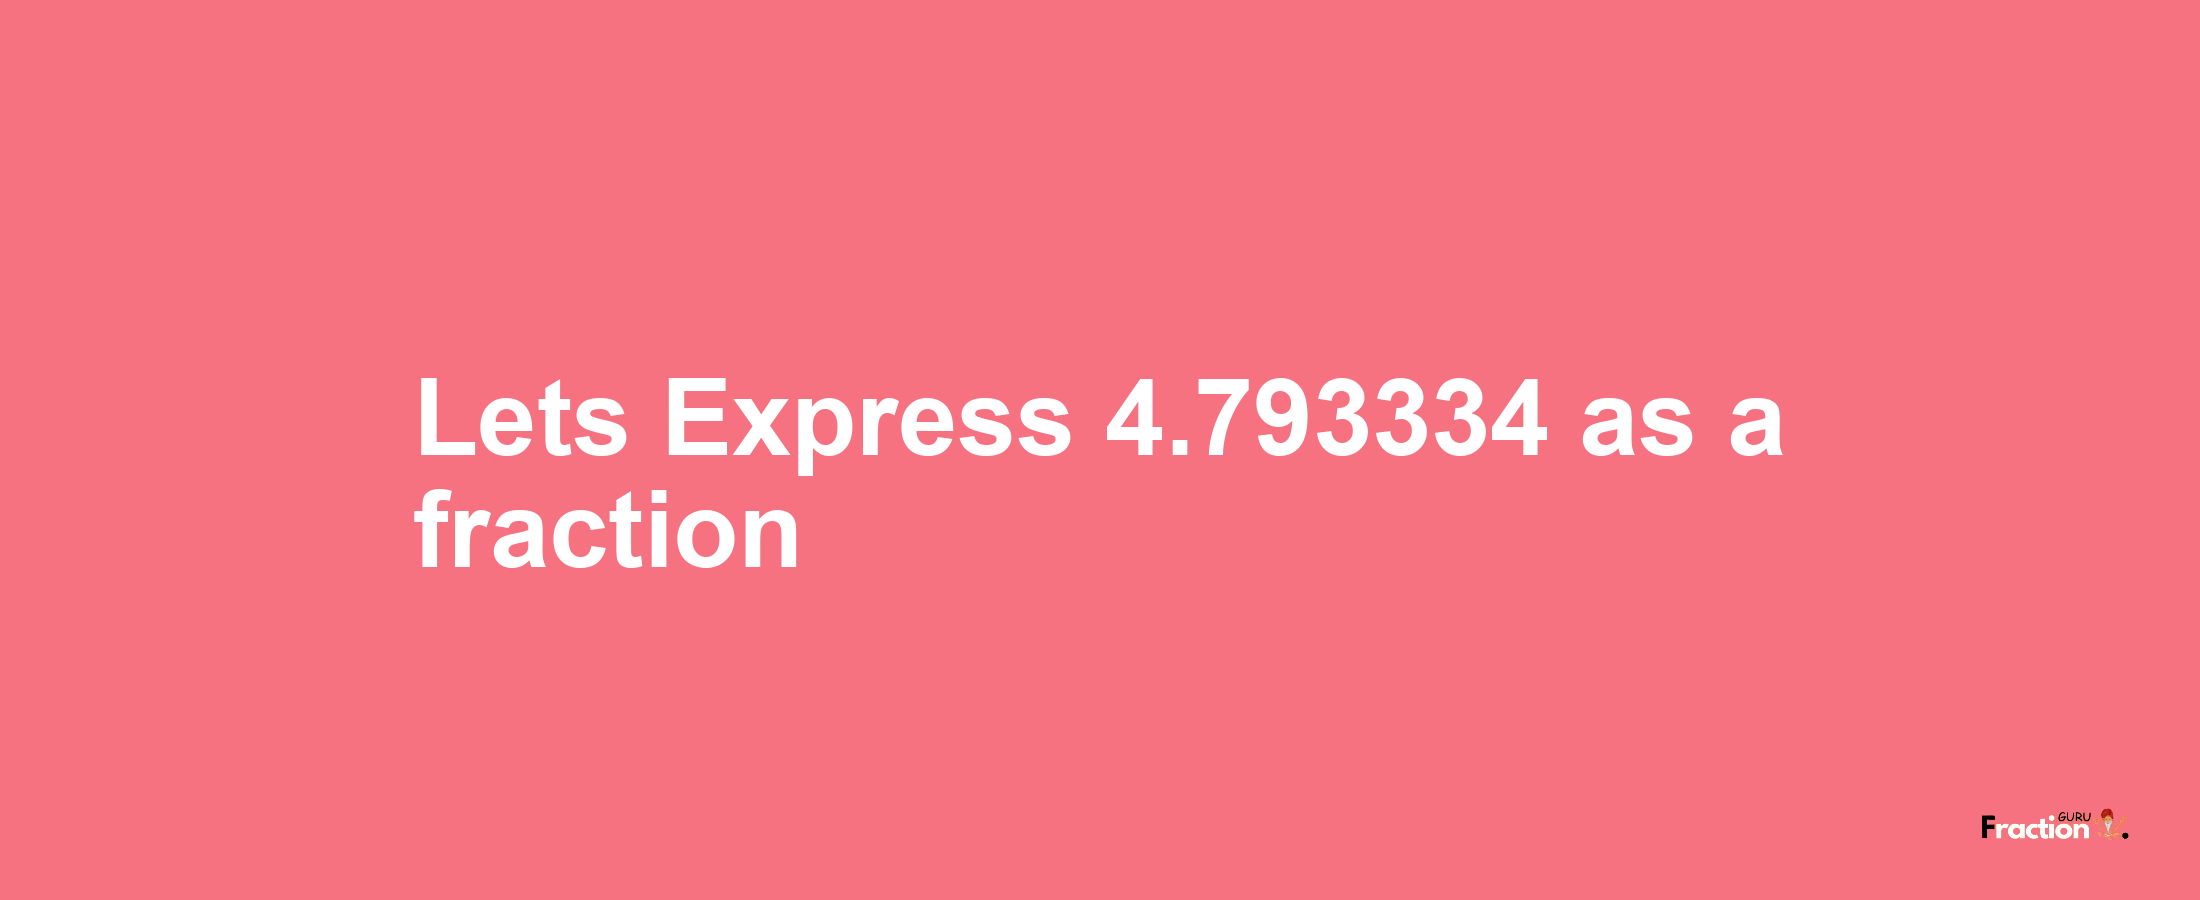 Lets Express 4.793334 as afraction